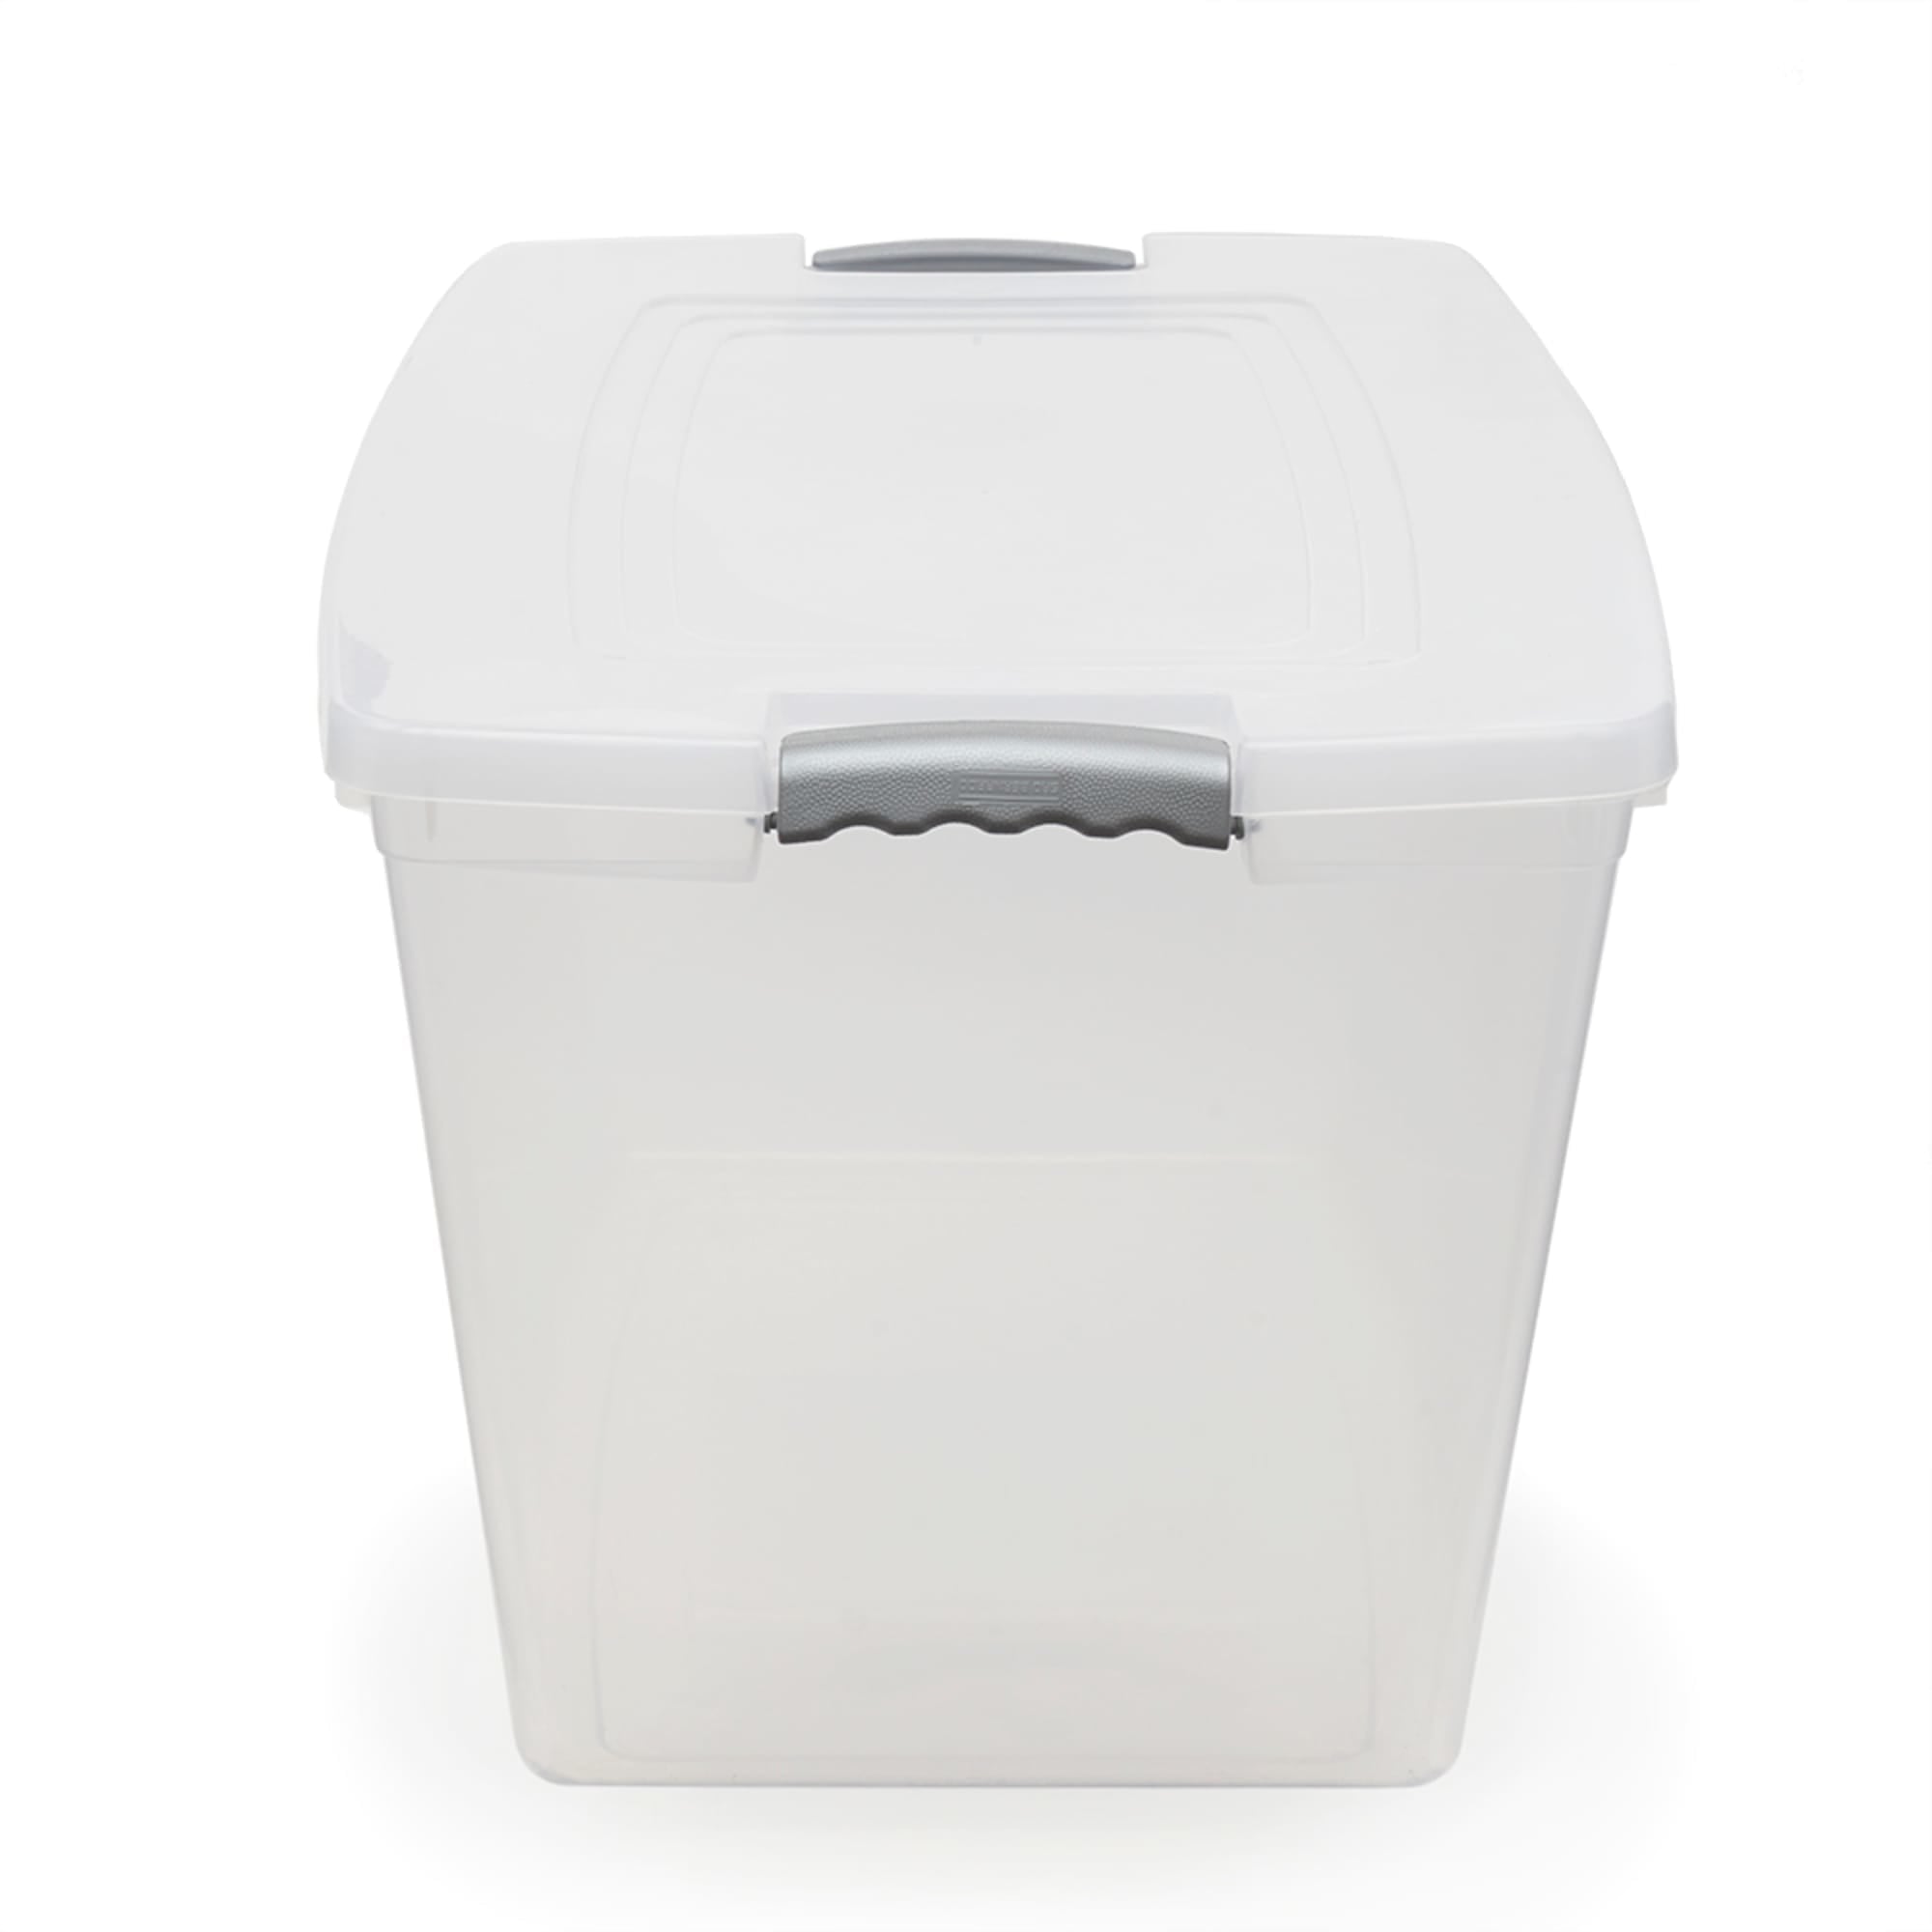 Home Basics 60 Liter Plastic Storage Container with lid, Clear $15.00 EACH, CASE PACK OF 6